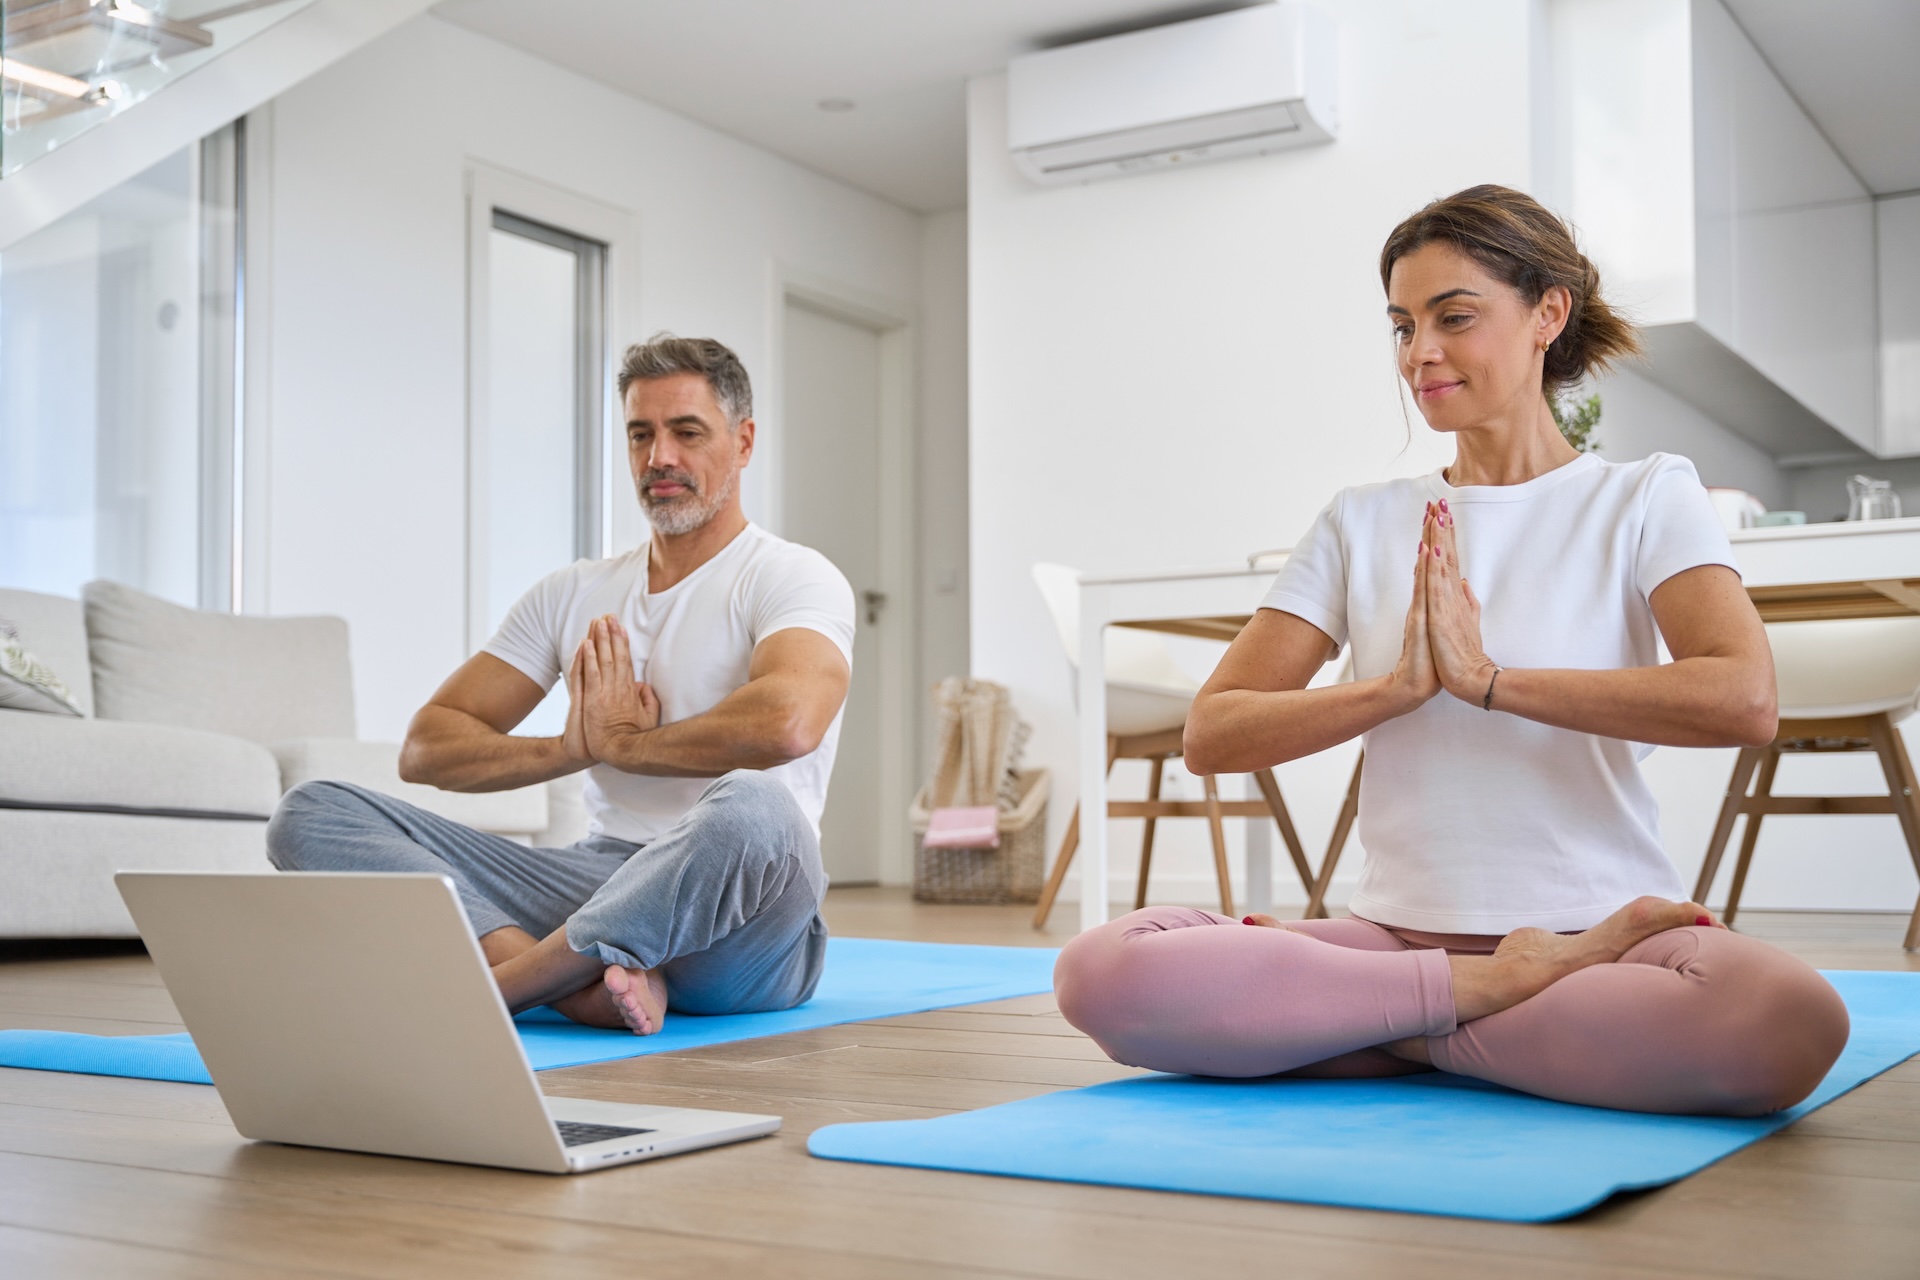 Middle aged family couple doing yoga at home looking at laptop. Healthy calm serene mature older man and woman doing exercises meditating watching wellness tutorial in living room.